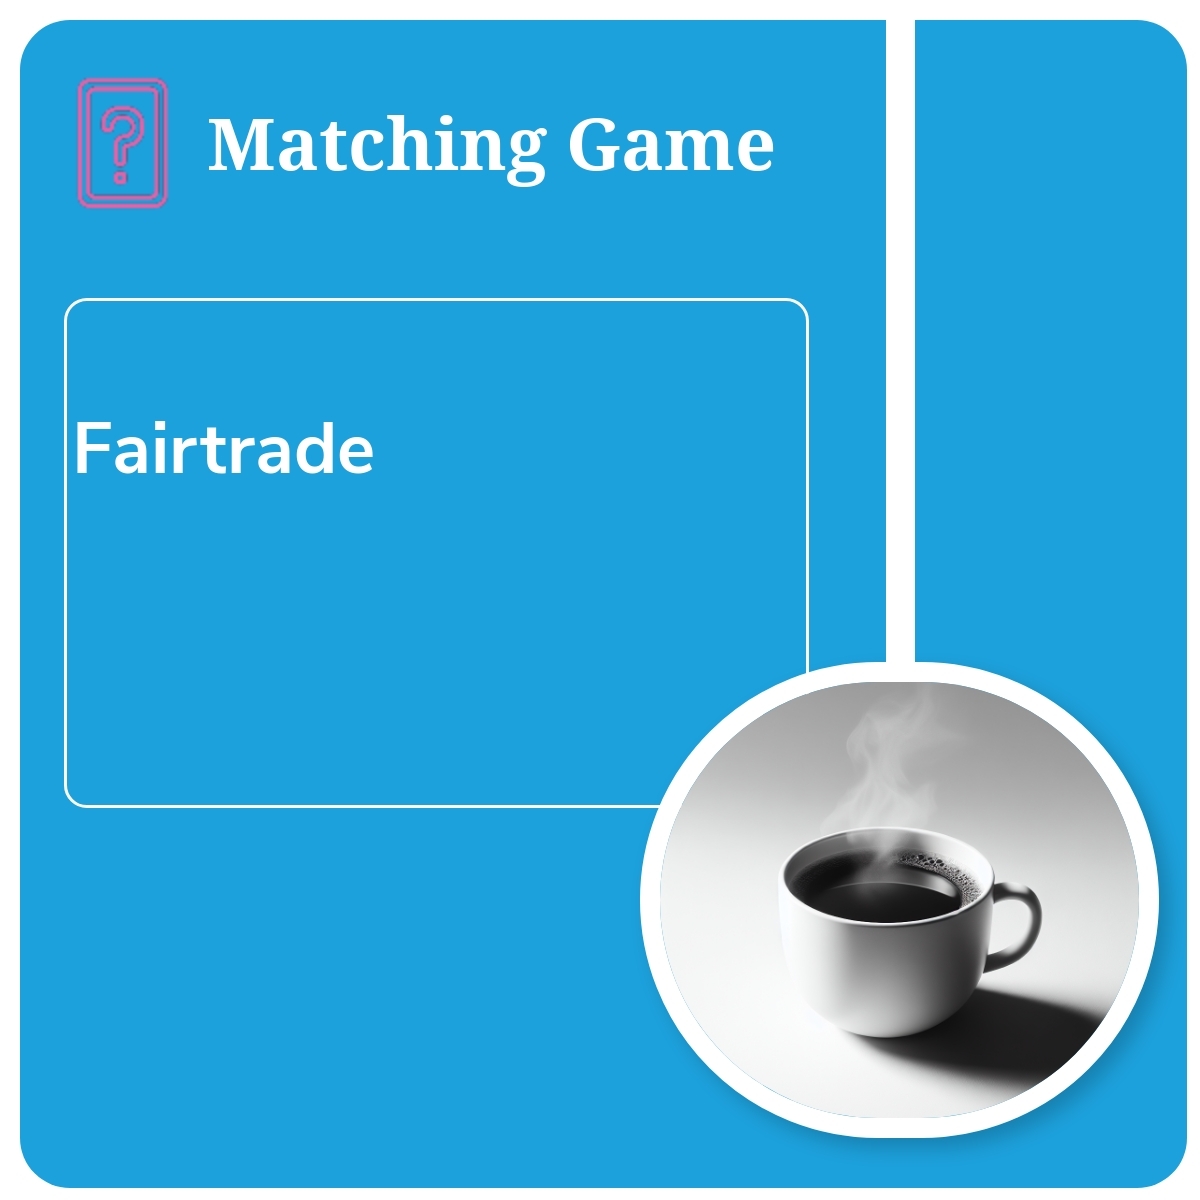 Matching Pictures to Definitions: Fairtrade